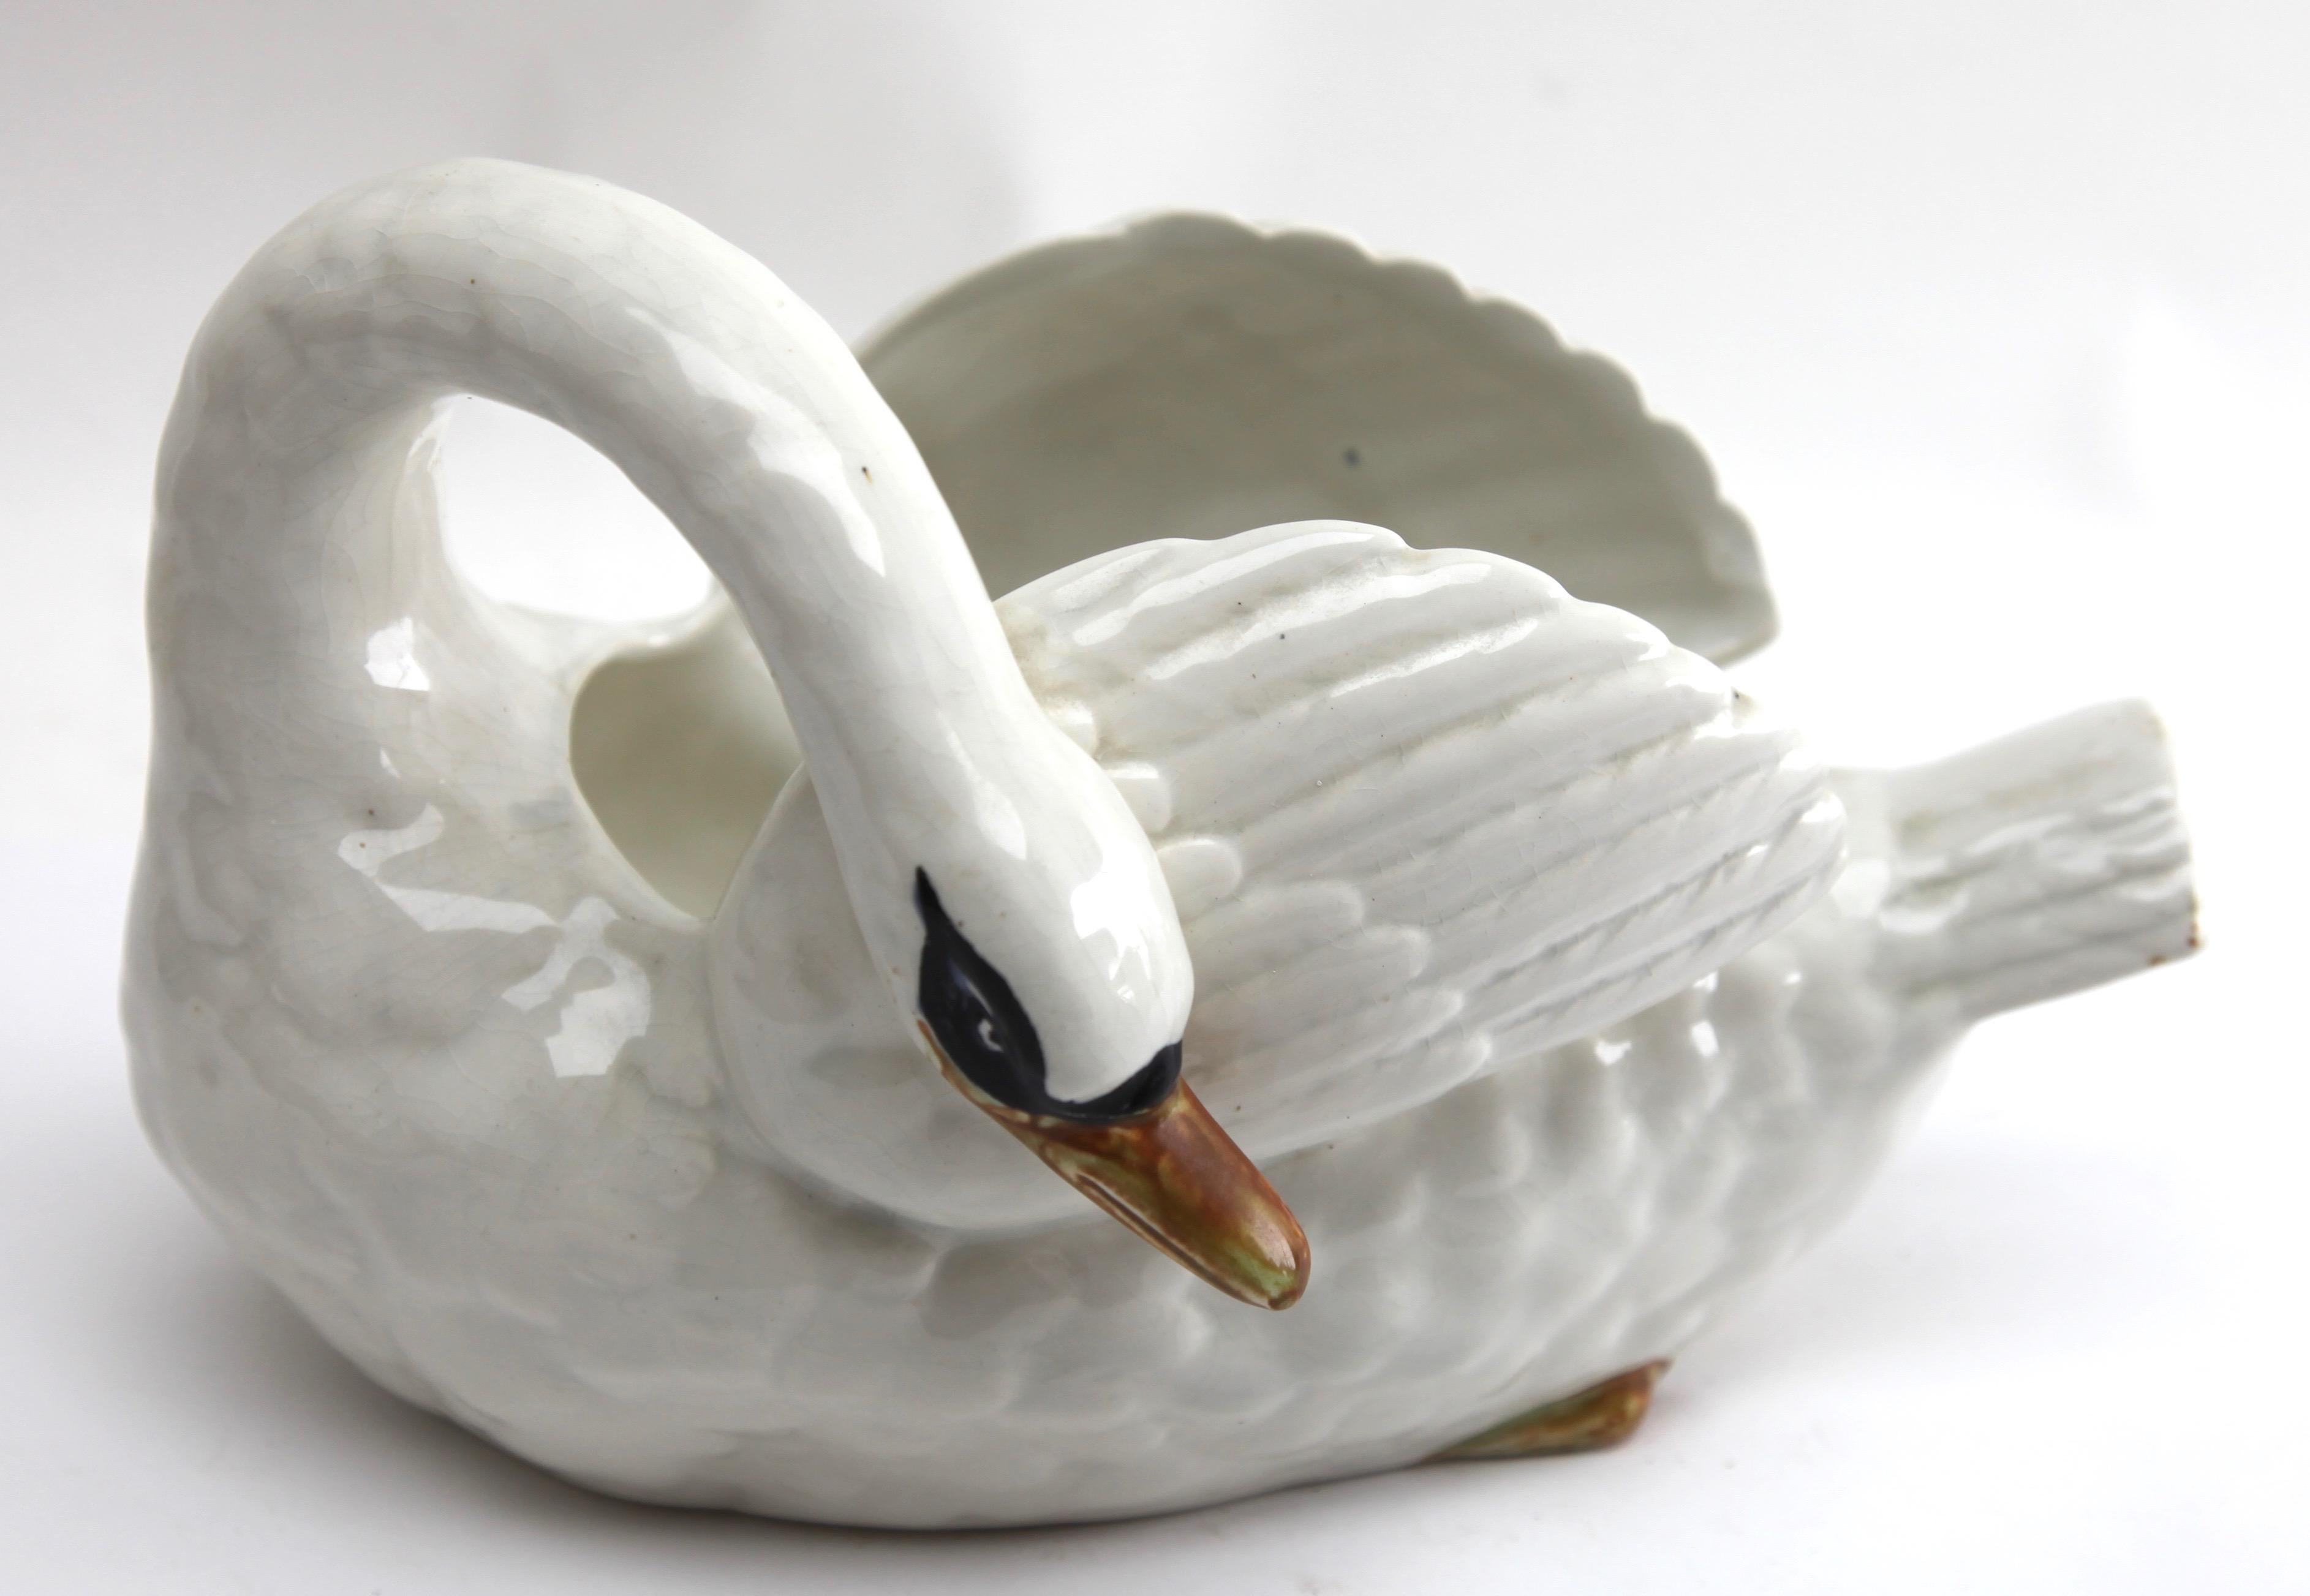 Early 20th Century Majolica Set of White Swans Jardinière Stamped Imperiale Nimy Belgium circa 1900